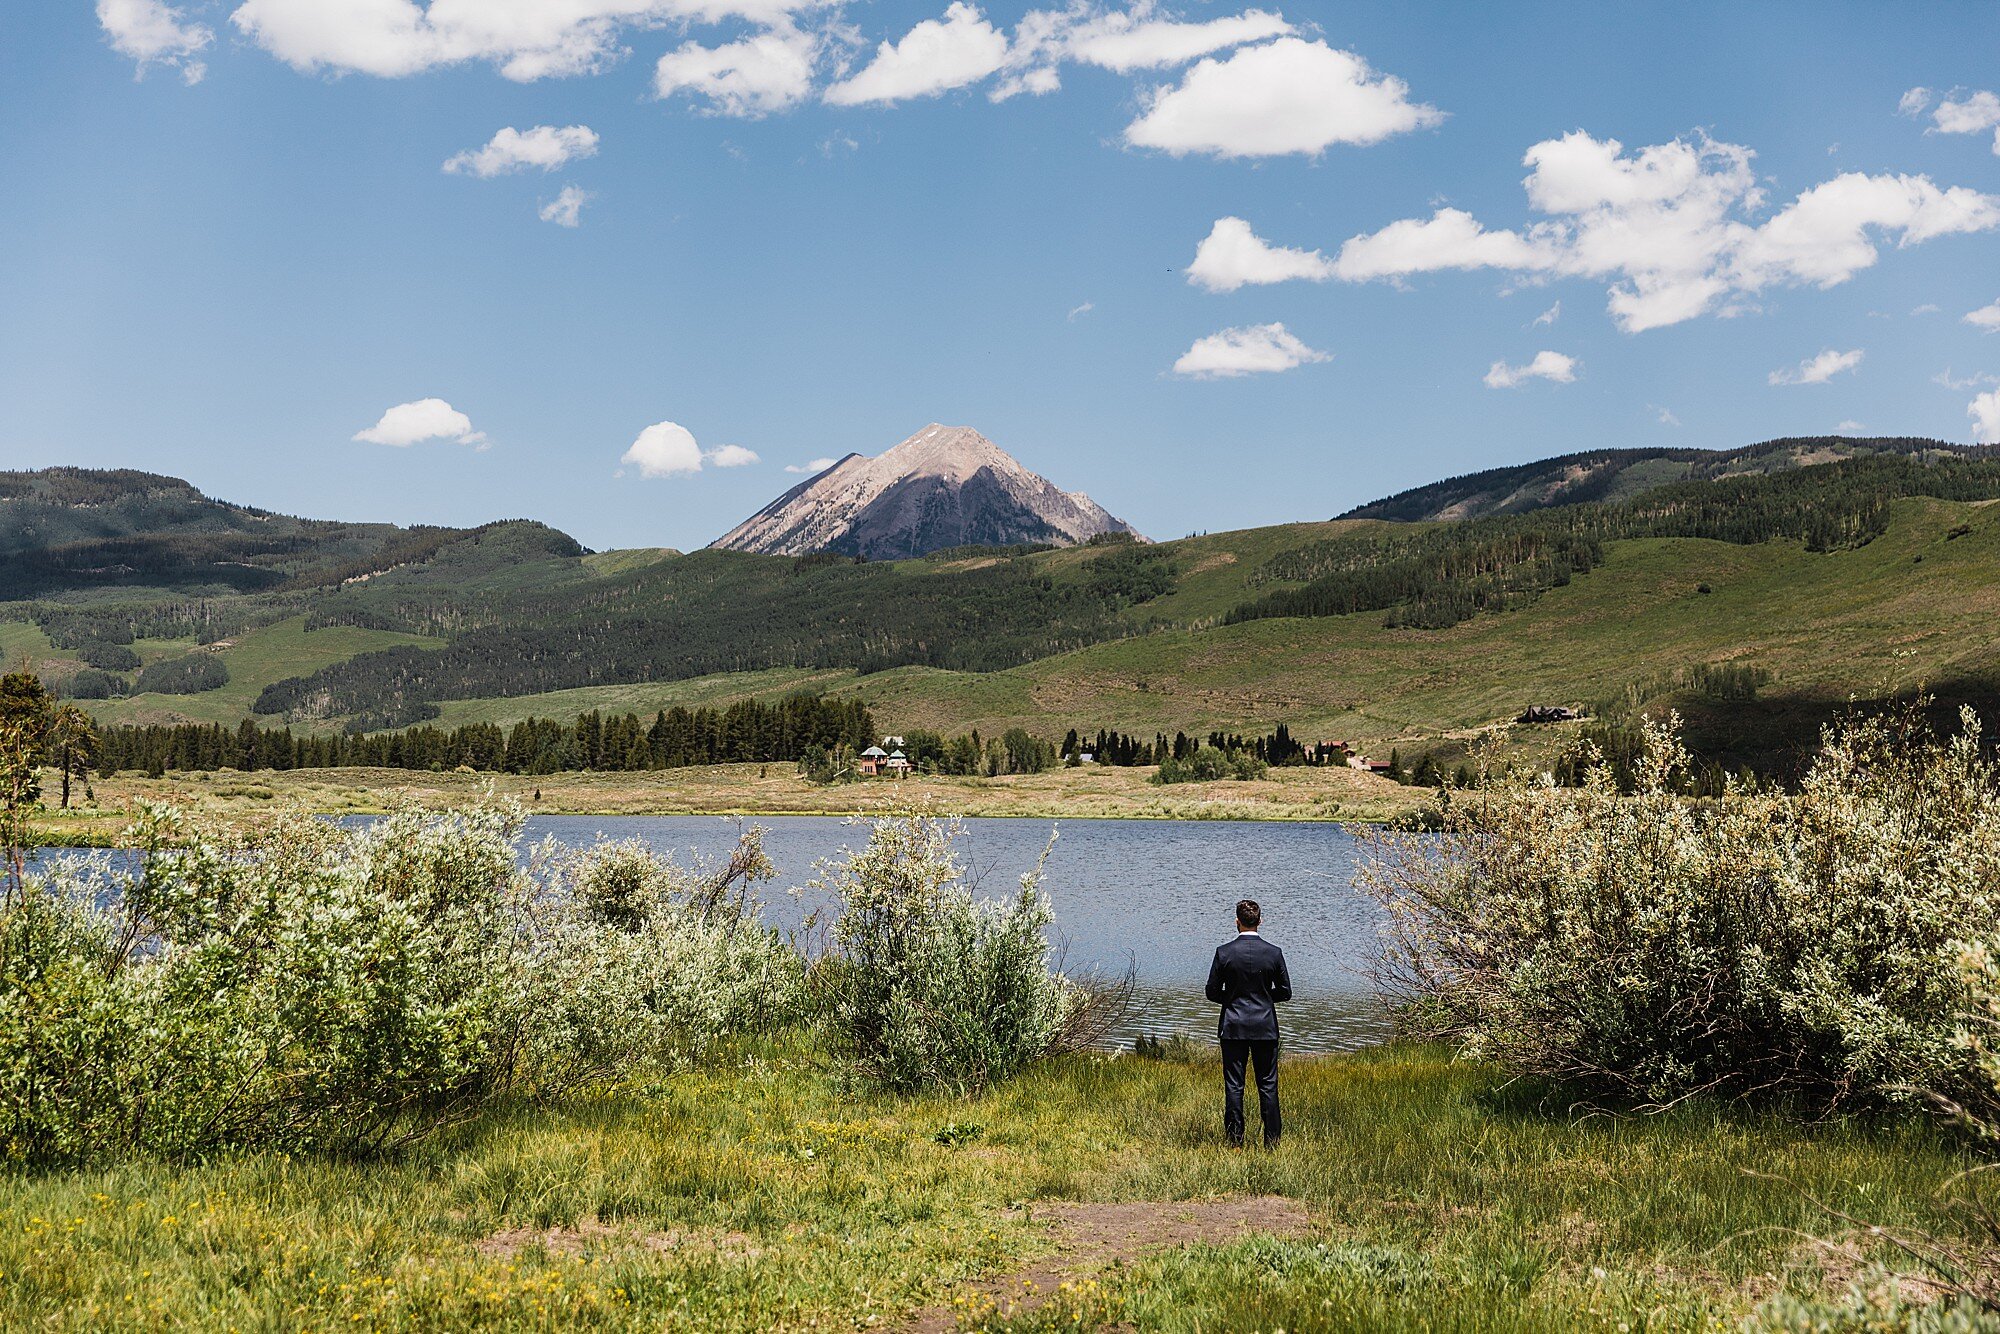 Mountaintop Elopement in Colorado with Wildflowers | Crested Butte Elopement | Vow of the Wildv